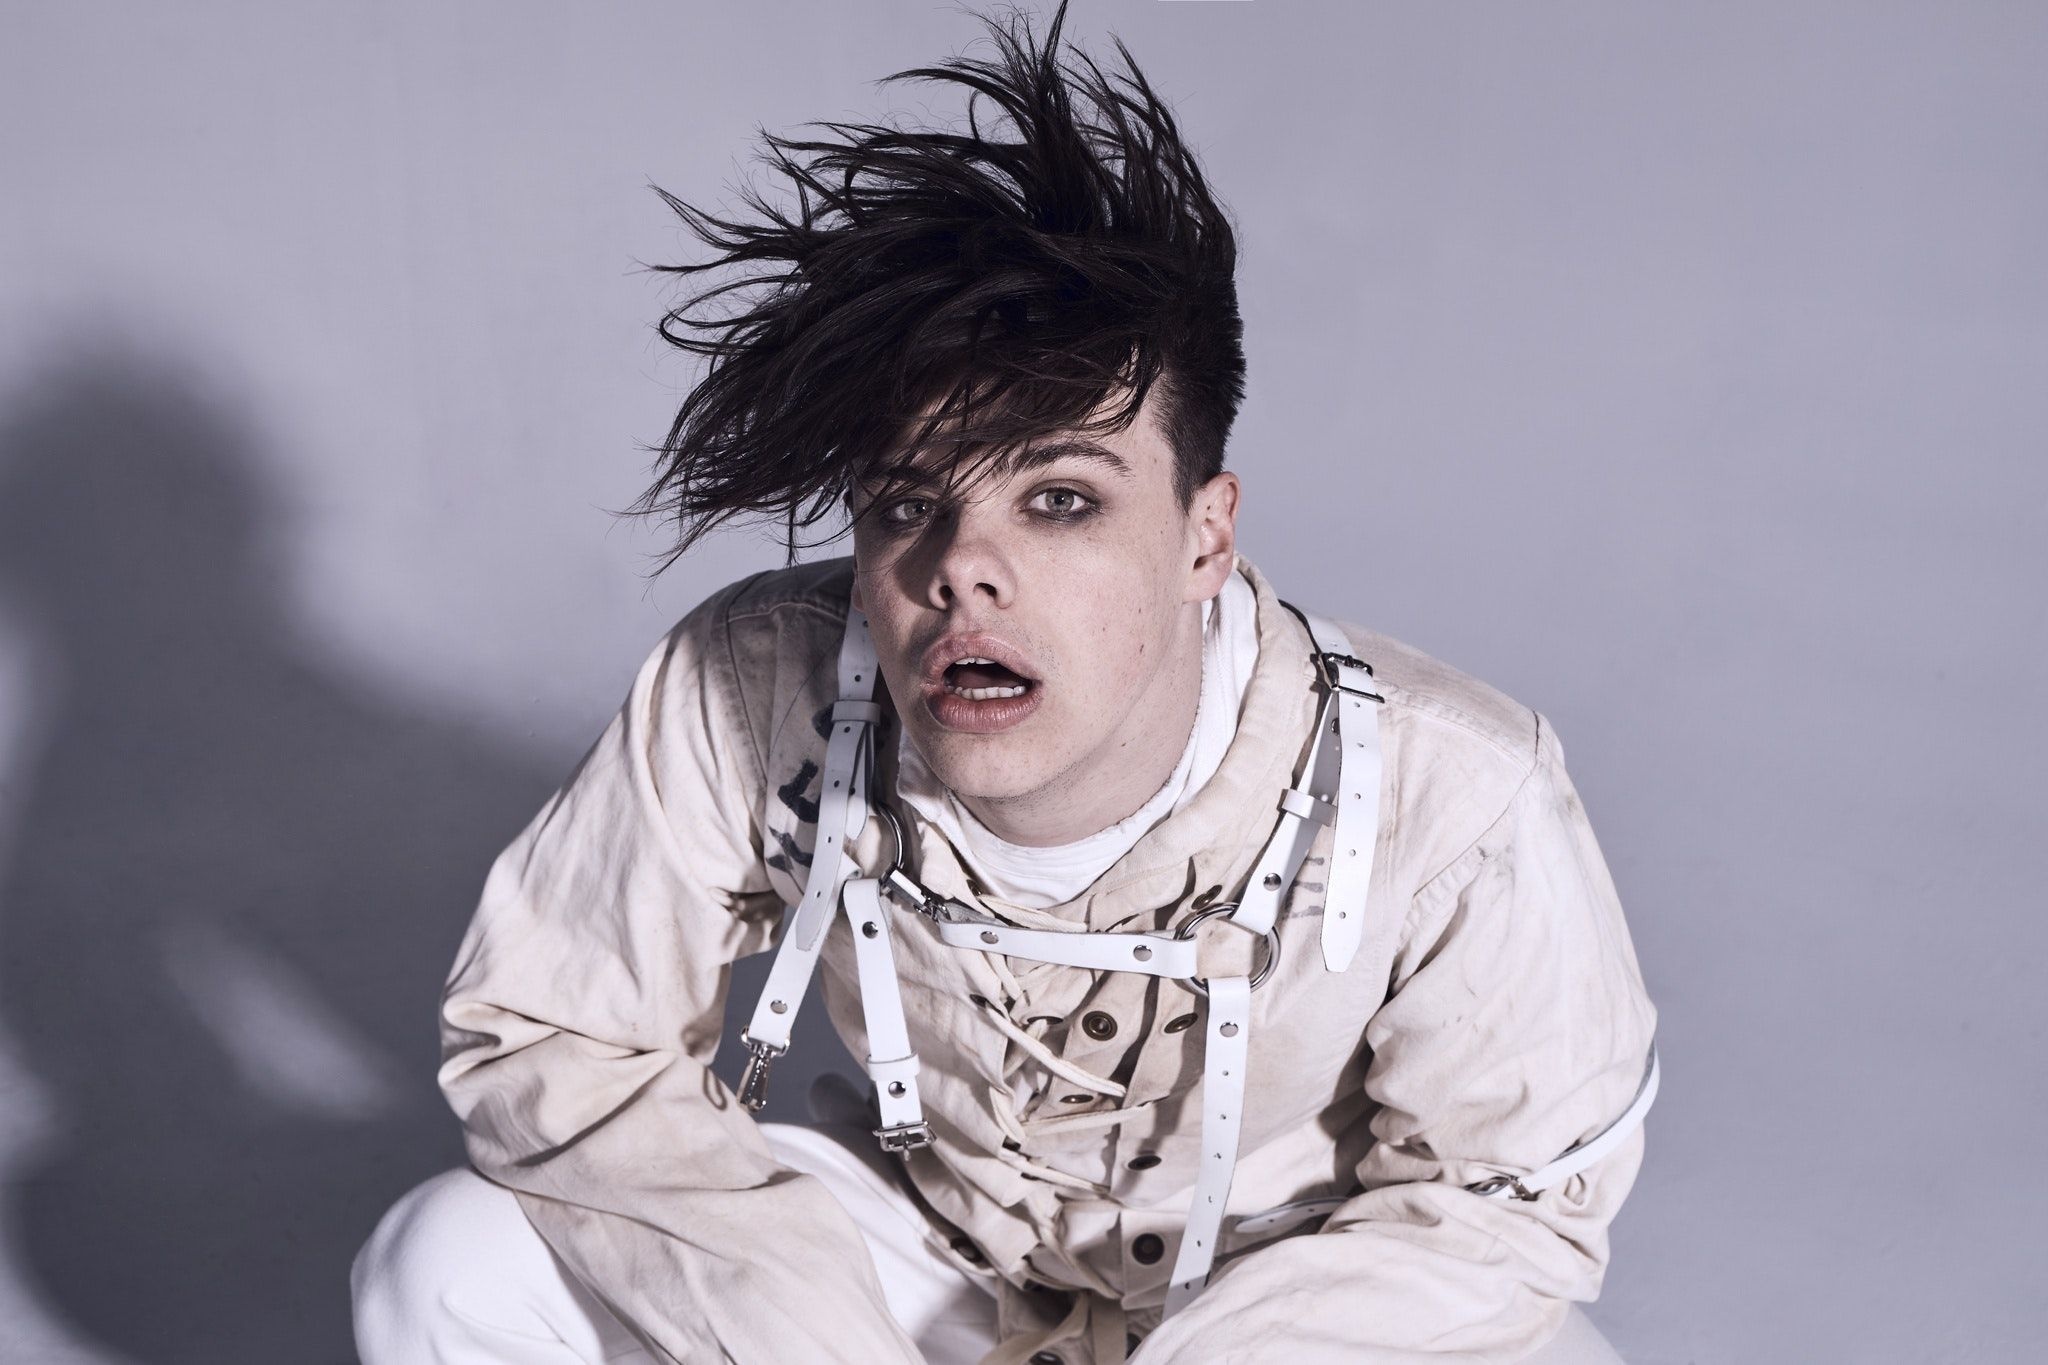 Yungblud Wallpapers - Top Free Yungblud Backgrounds 2050x1370